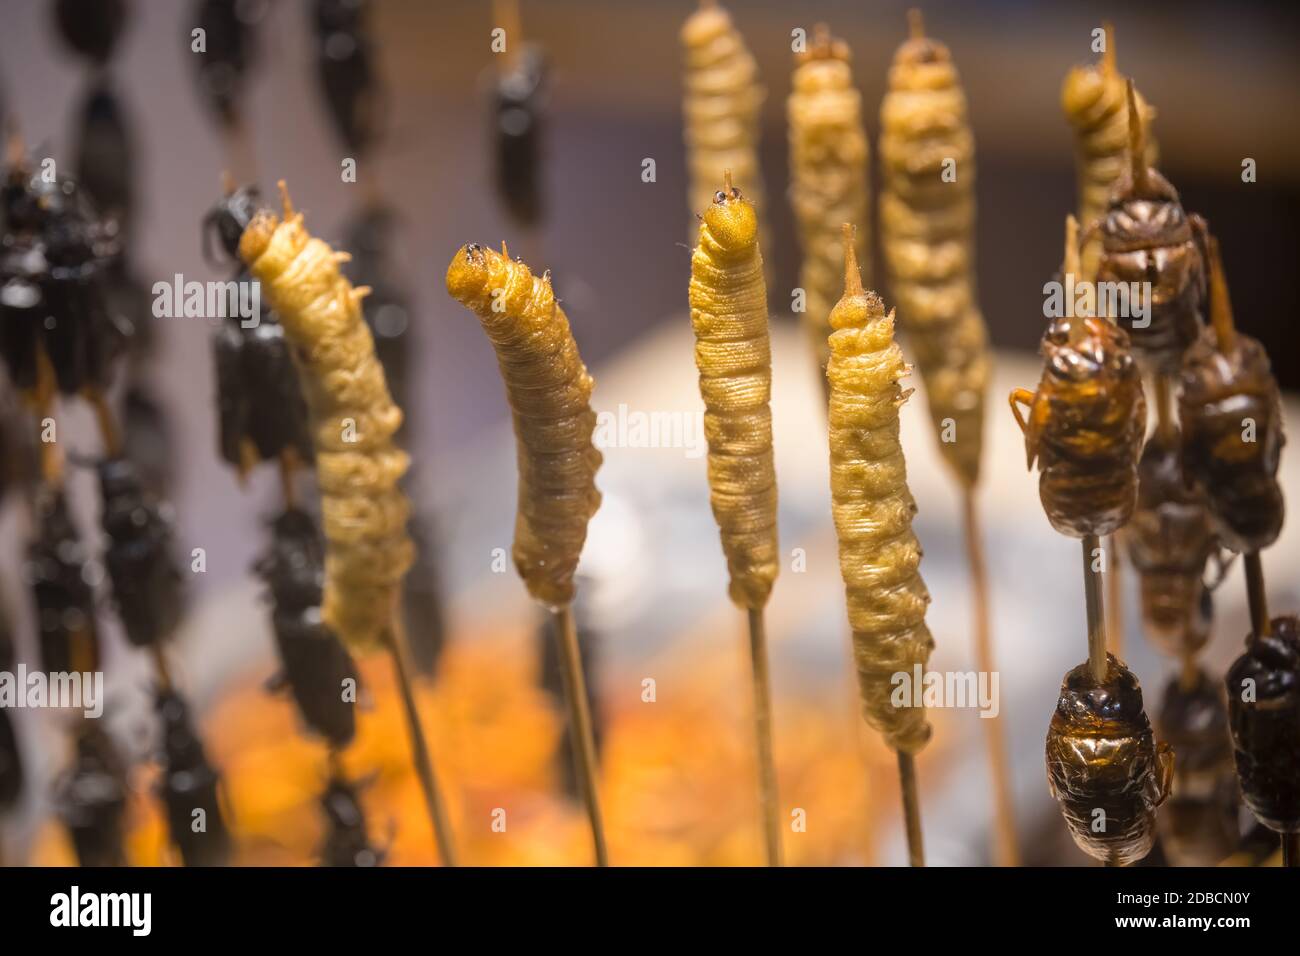 A view of crispy cooked worms and other insects served on wooden sticks Stock Photo